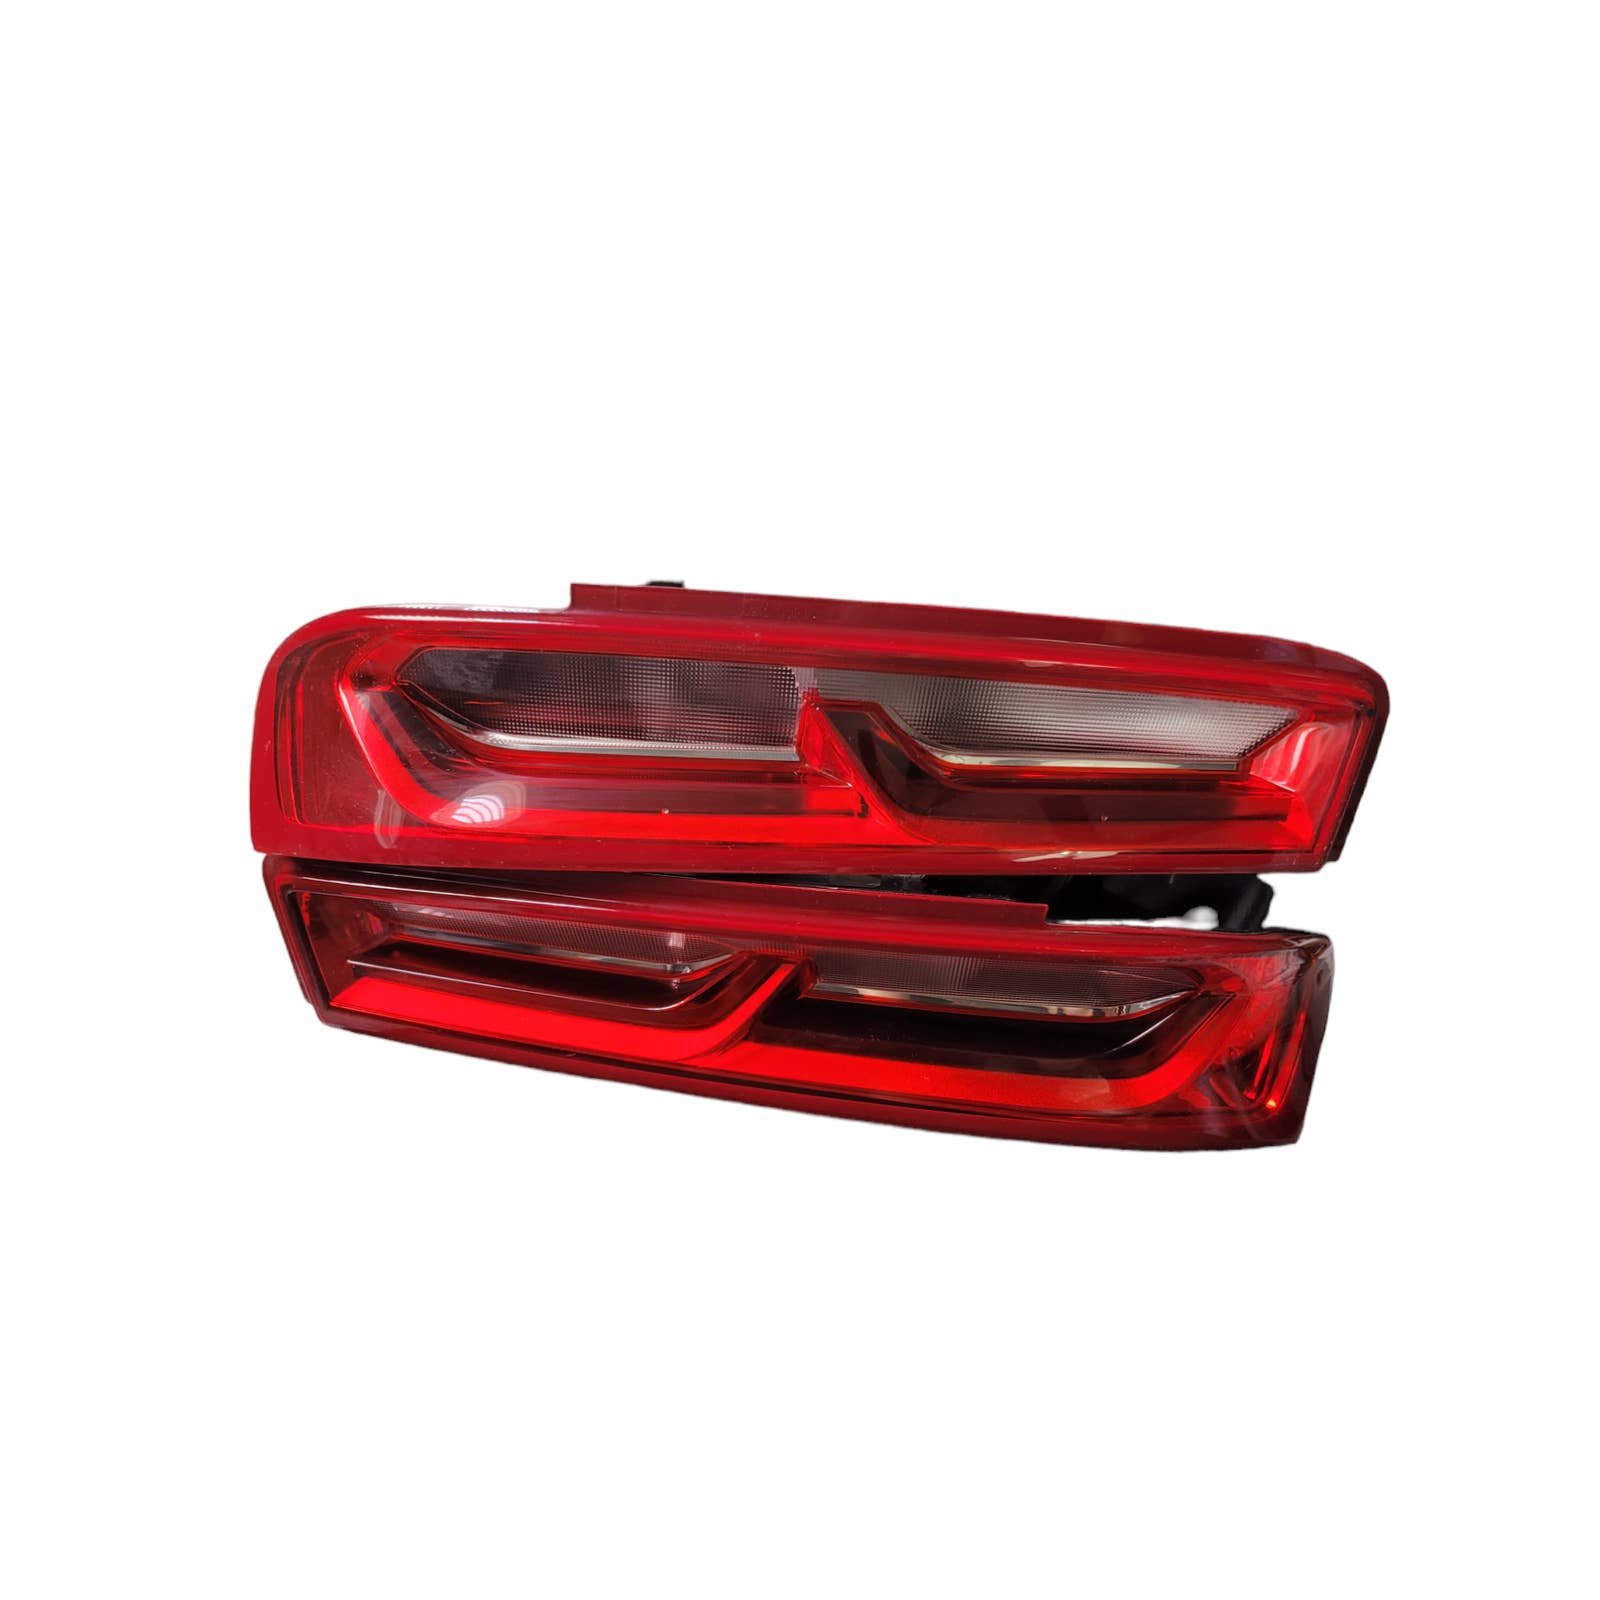 LED Rear Tail Lights, for 2018 Chevy Camaro, Chevrolet Camaro, Tail Lights j47gowjow